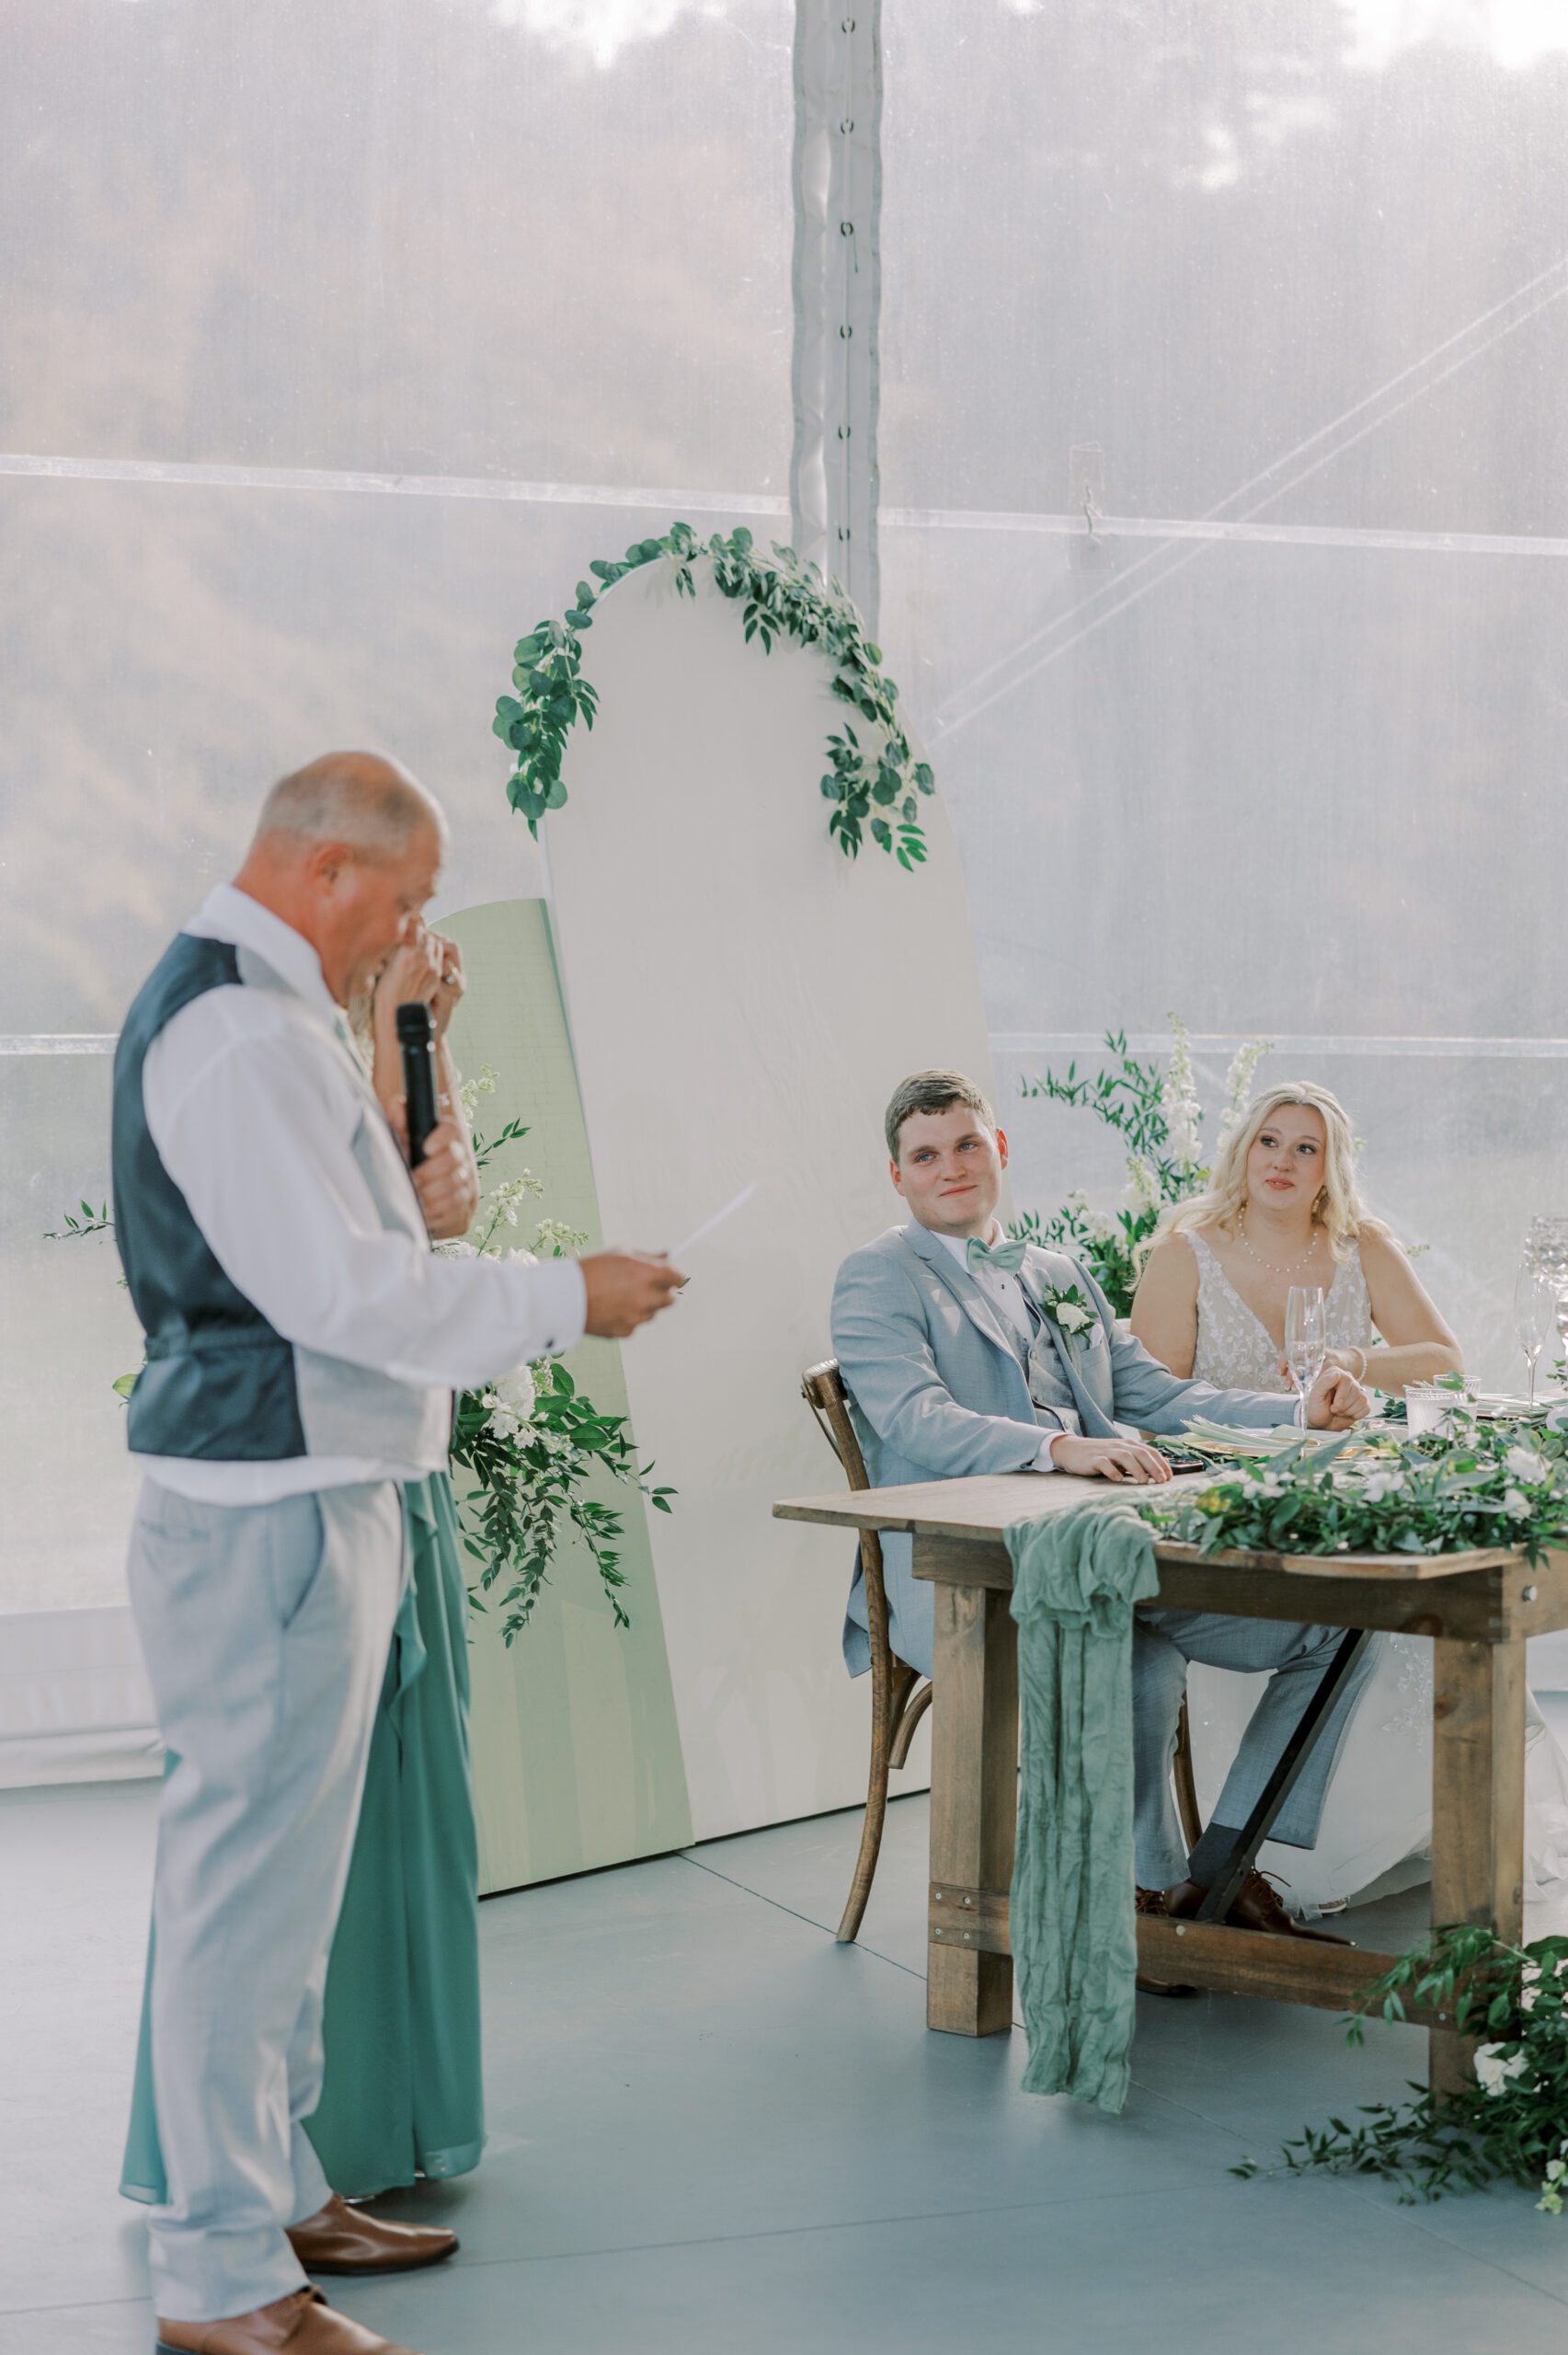 Father of the bride giving a speech while bride and groom watch from their table, white and green decorative arched pieces behind them with greenery on them